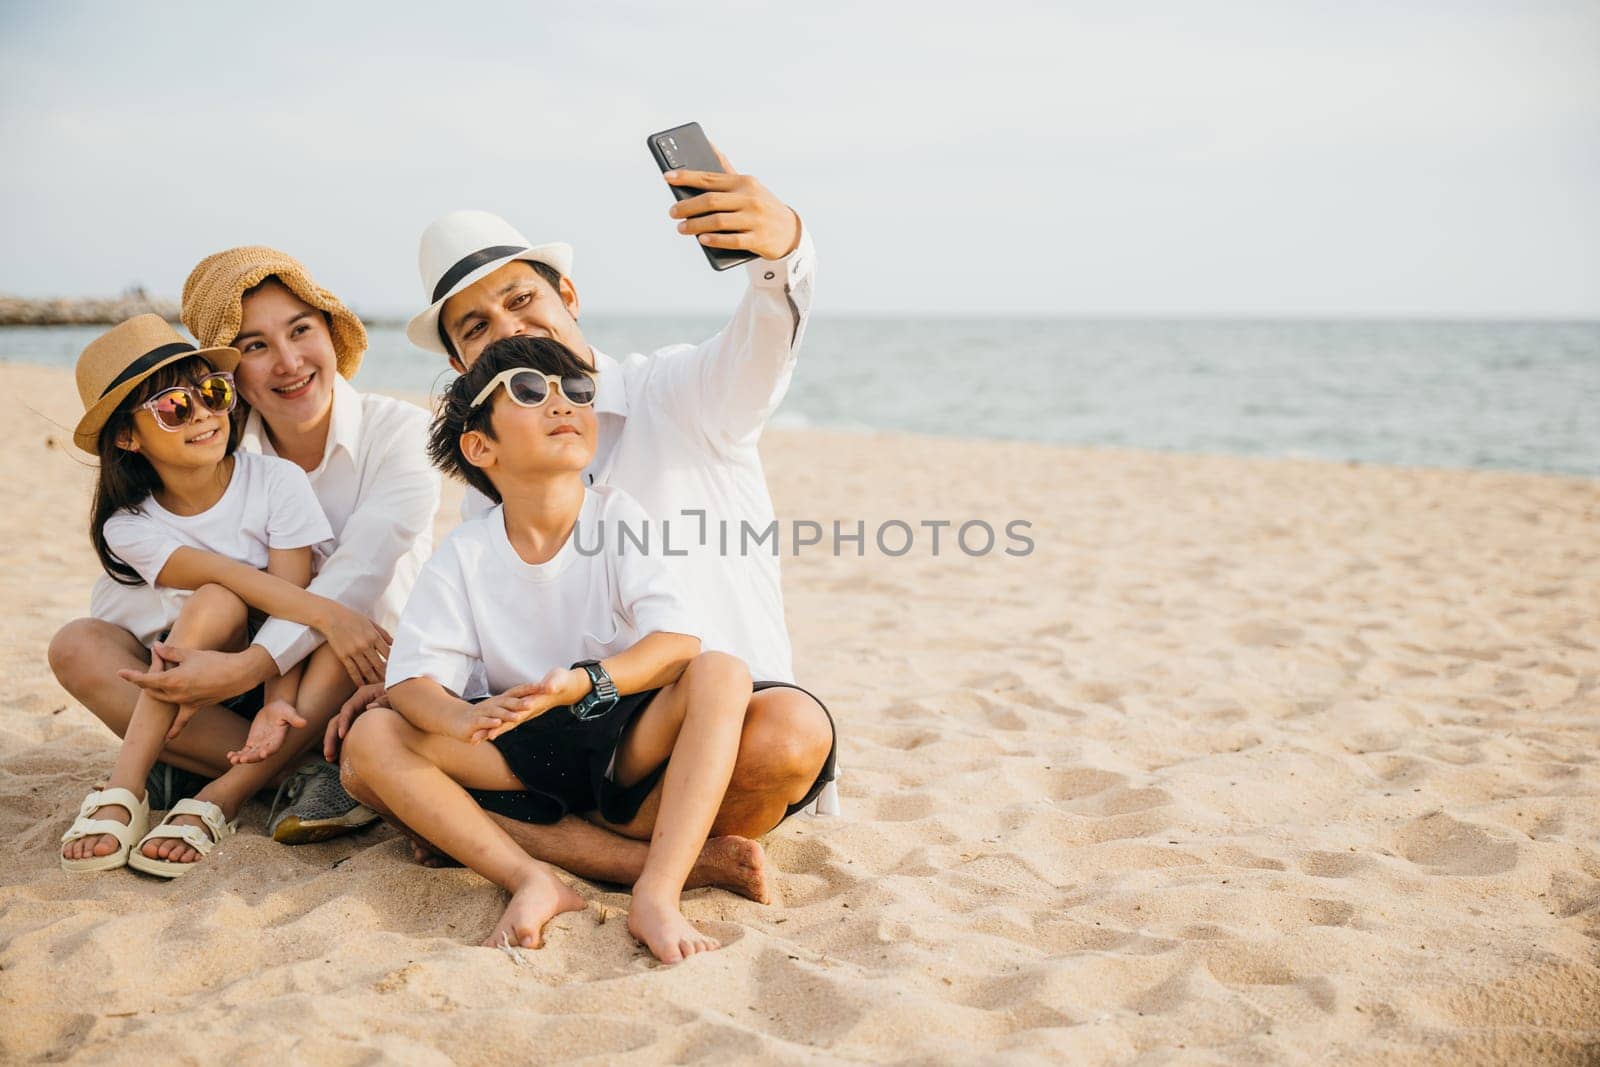 A delightful family scene unfolds on the beach capturing laughter and joy as they take playful selfie near the sea during their summer travels. A perfect portrayal of family togetherness. tourism day by Sorapop